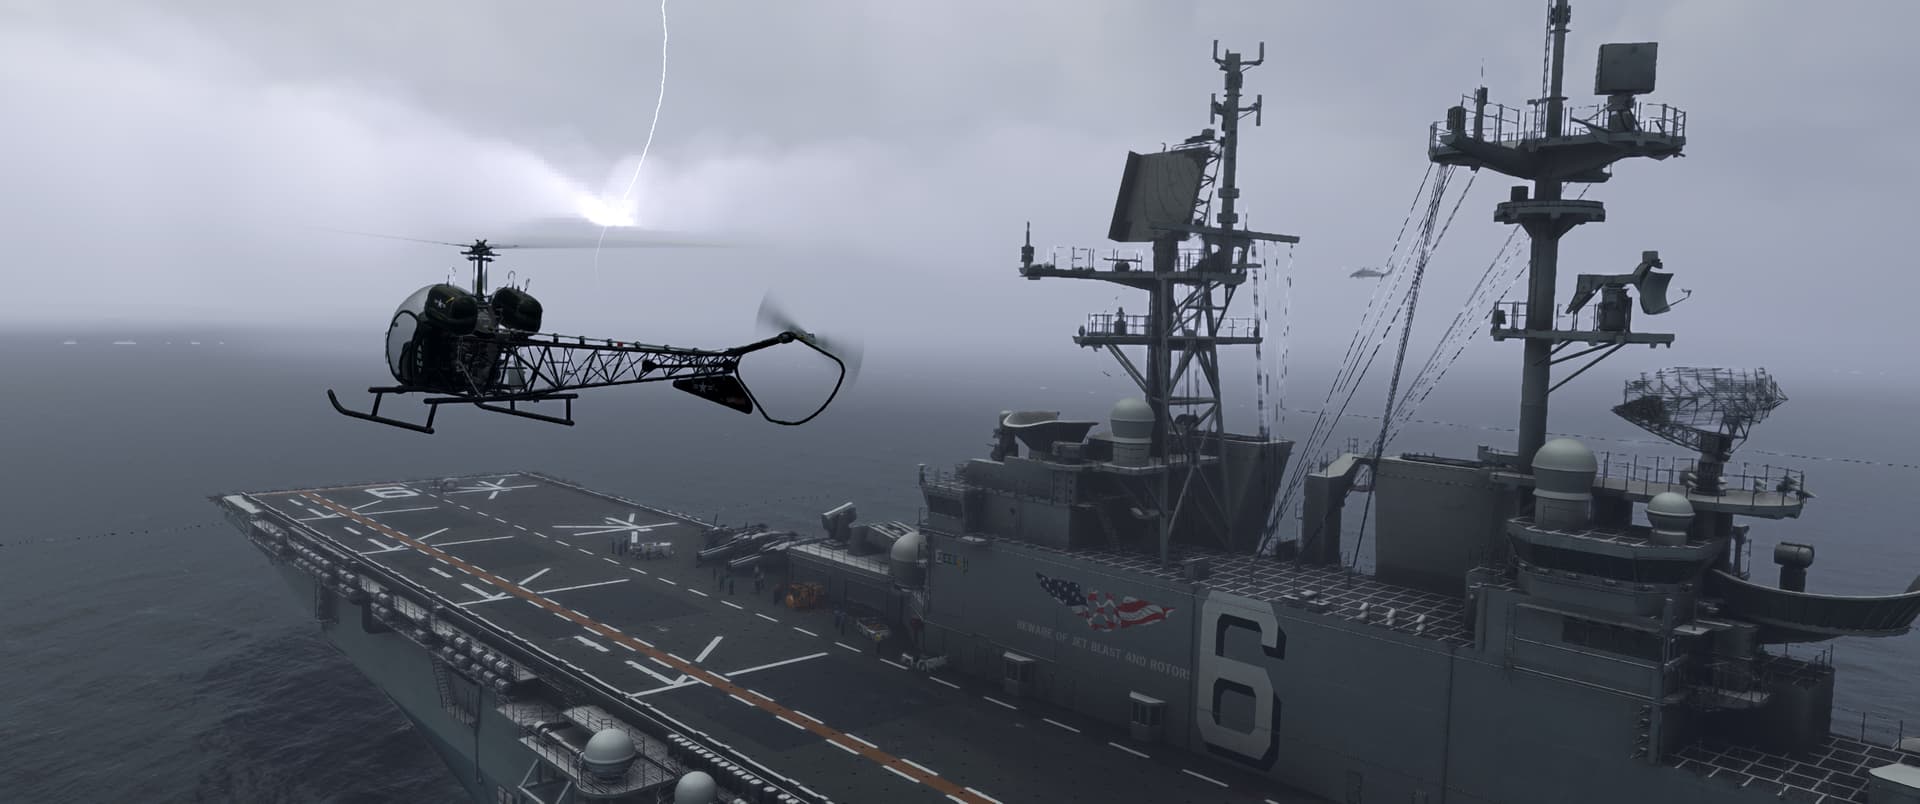 A small military helicopter flies above the deck of a warship, with lightning striking the sea ahead.